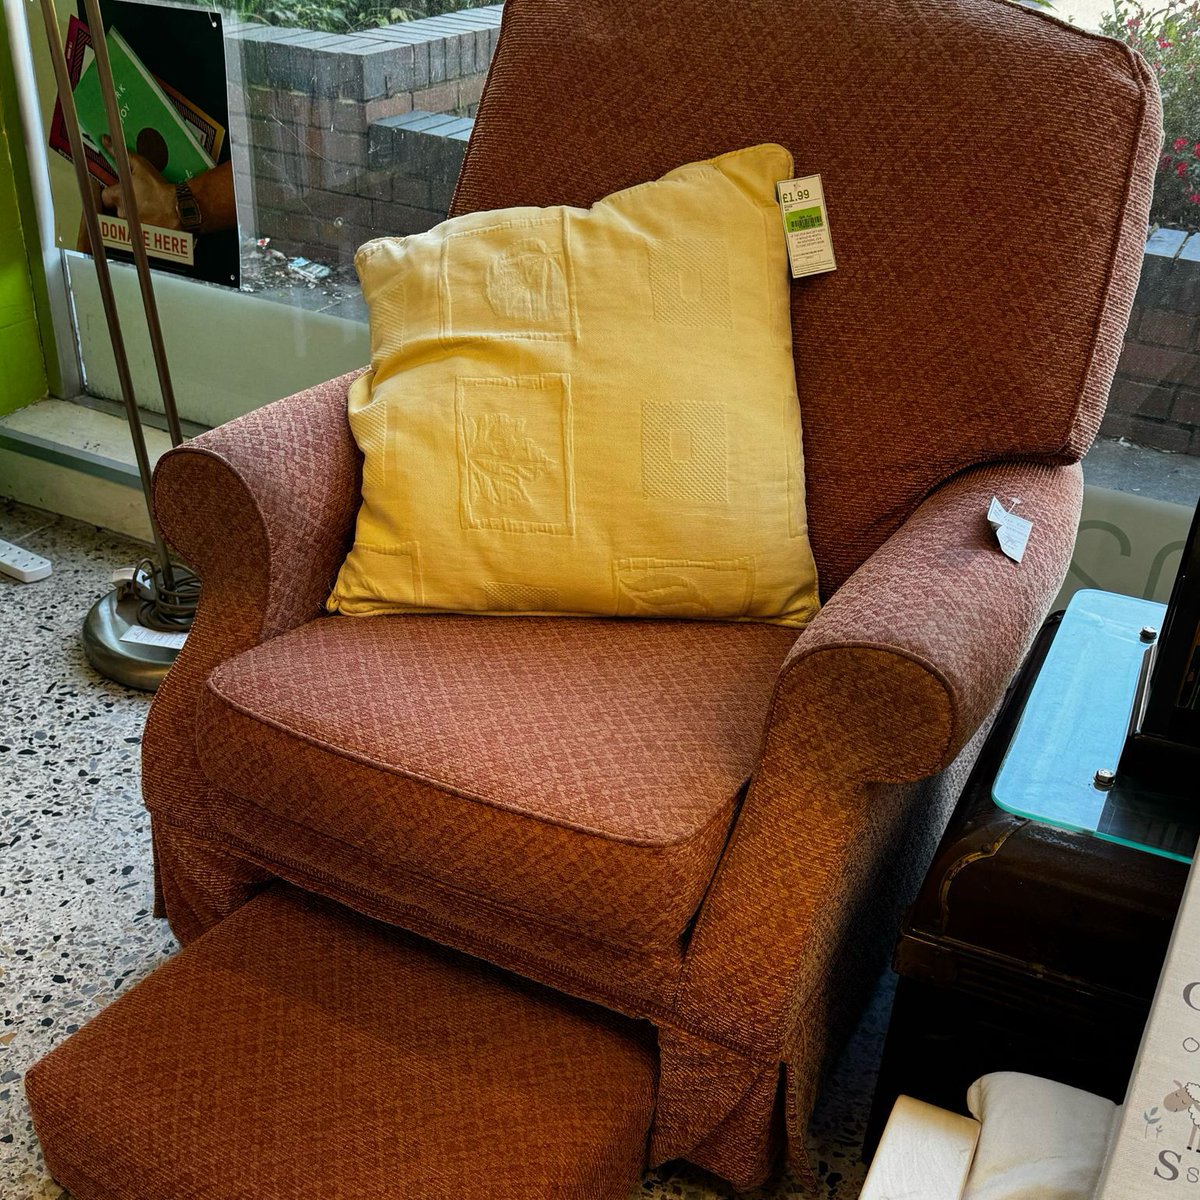 Chair £40
We are in need of good condition donations to continue our work. We operate a local collection service for large furniture, call the shop 02380 779580. #secondhandfurniture #southampton #retrofurniture #charityshops #foundinoxfam #shirley #oxfamshops #furniture